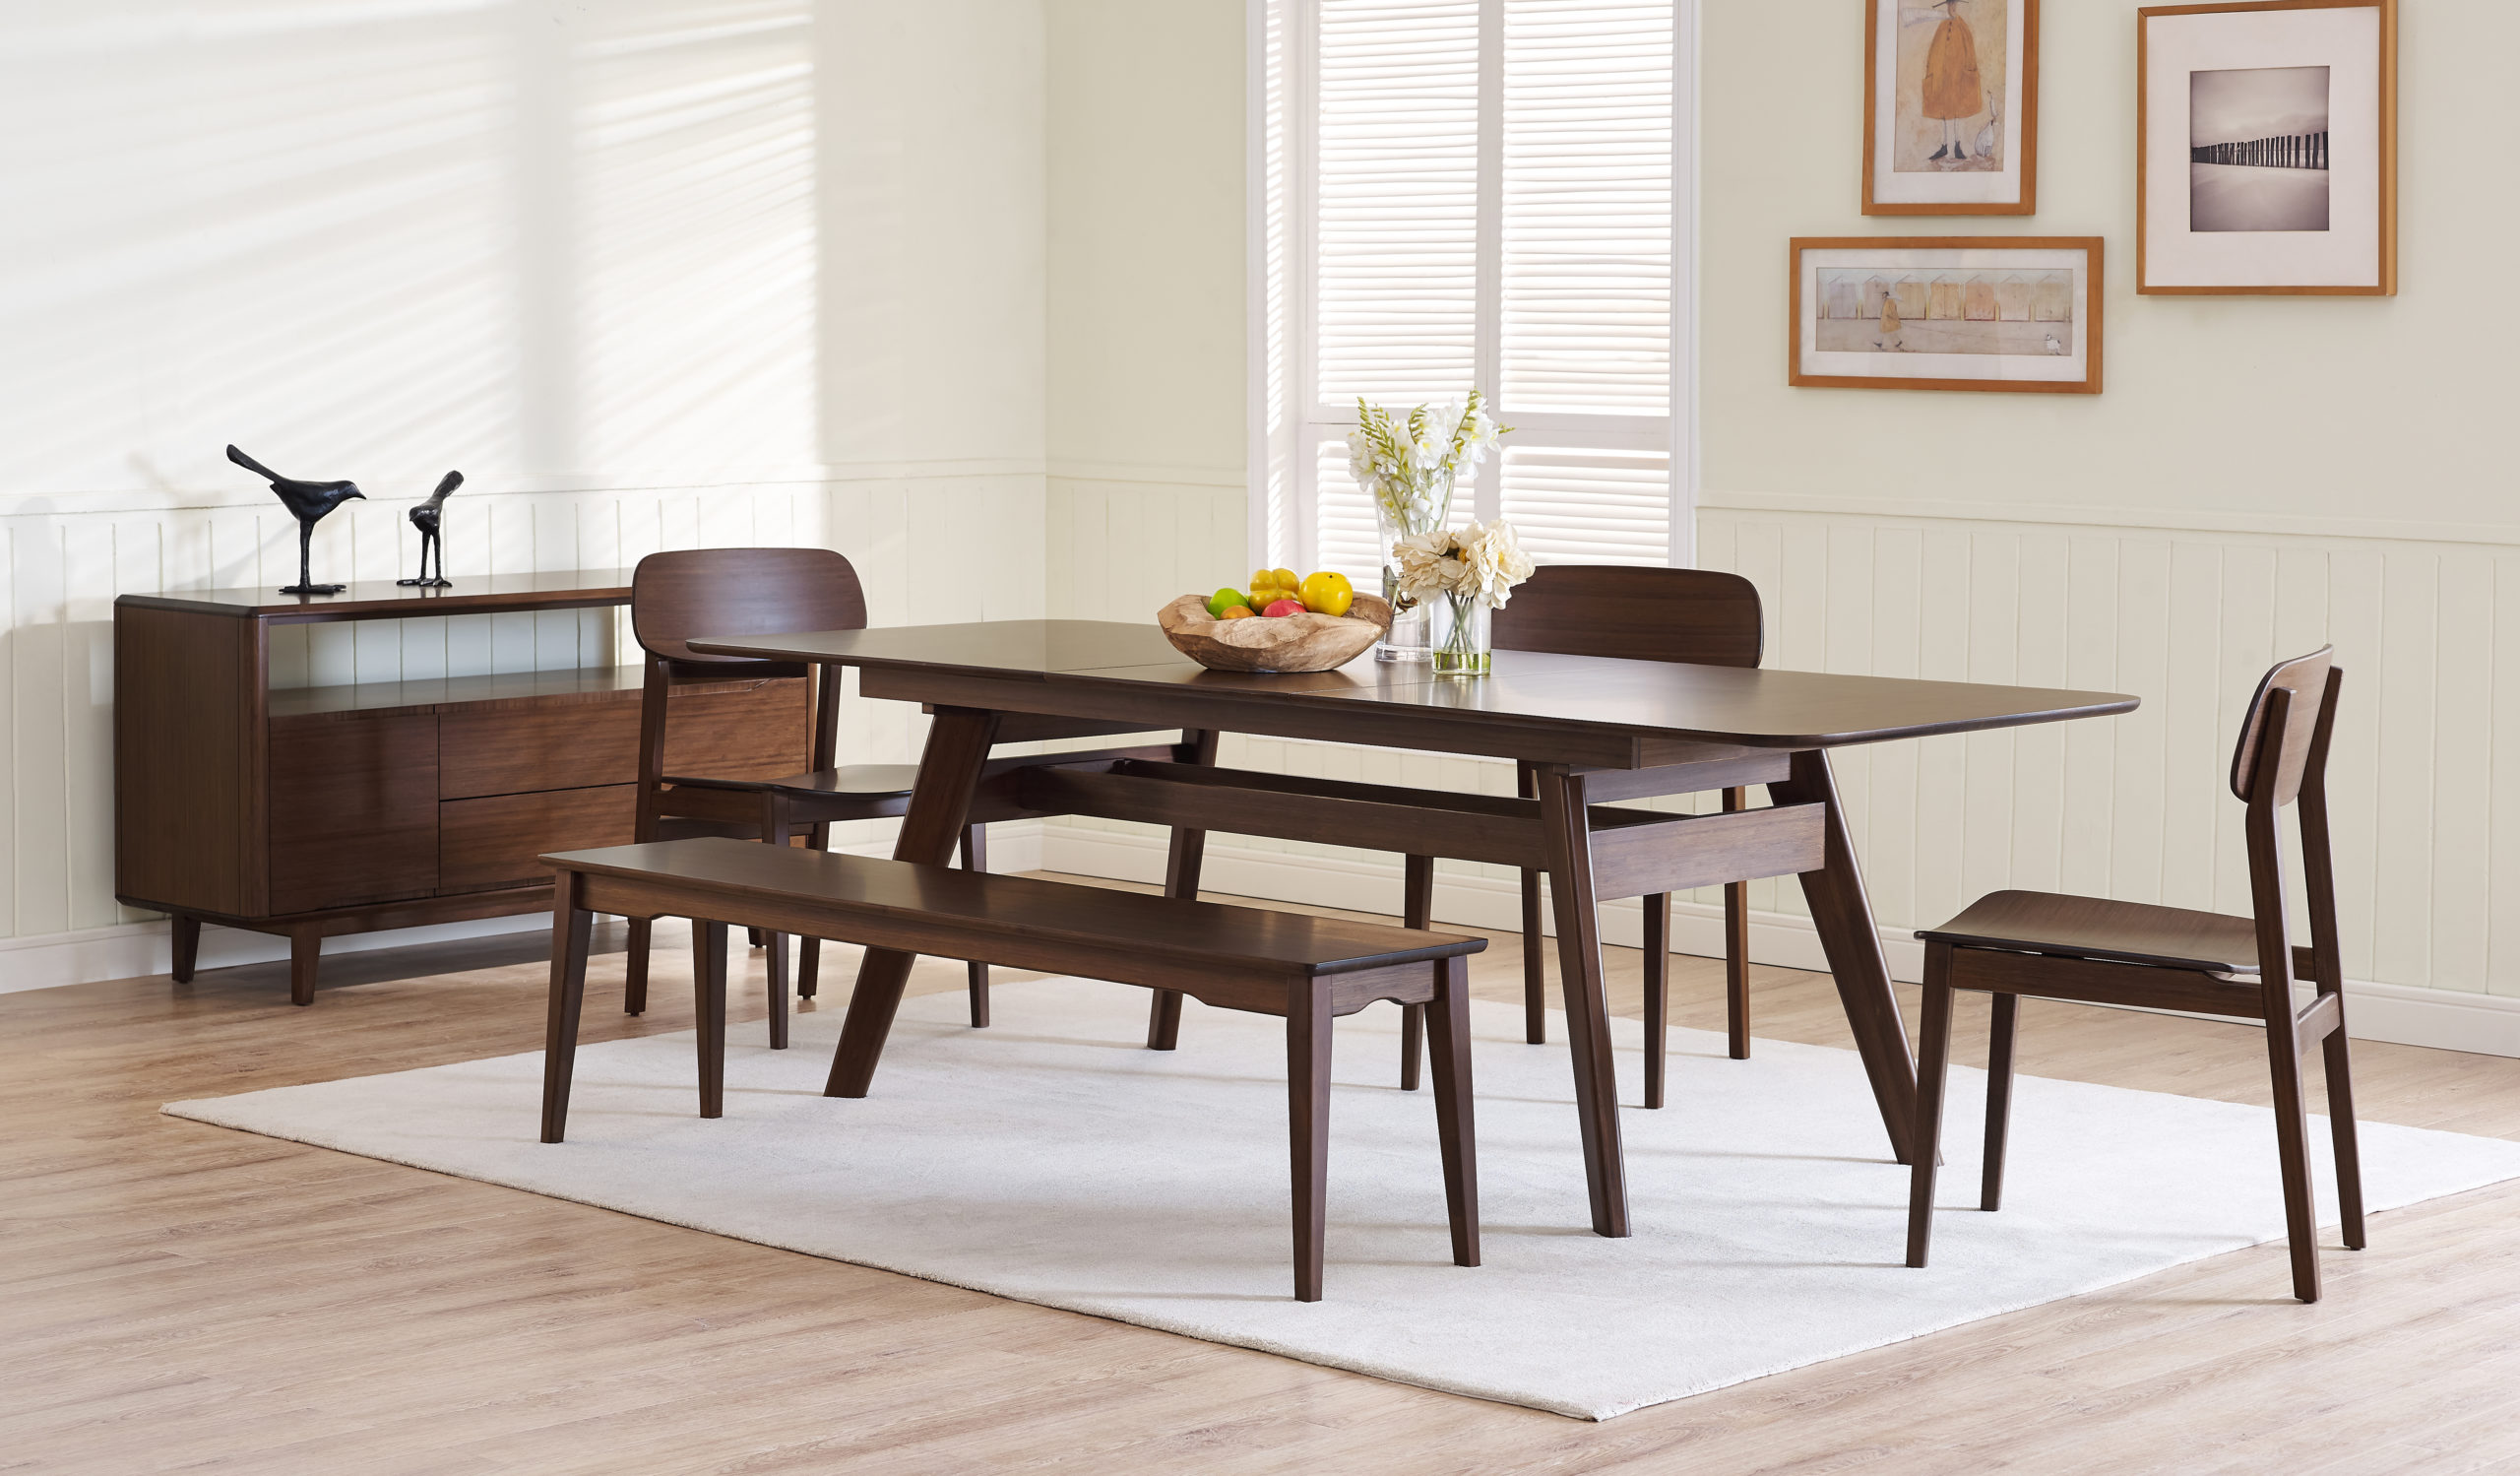 Currant Extension Table [2 colors] [92"]